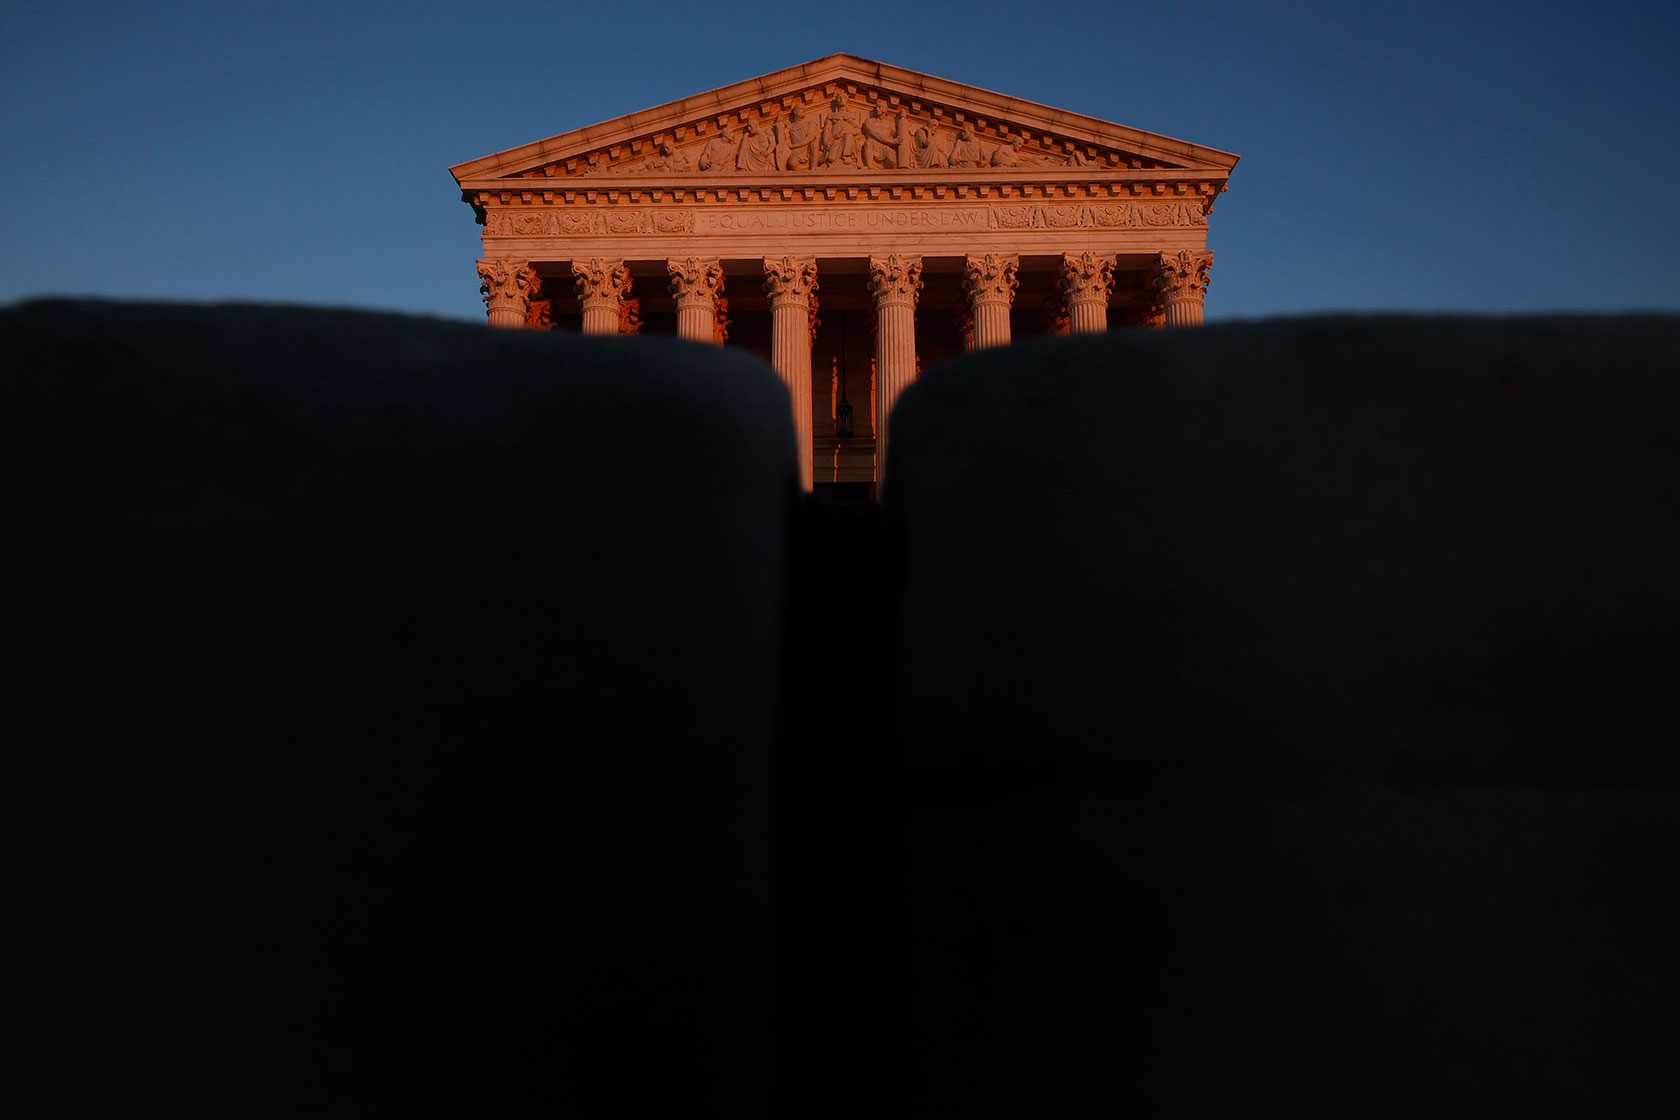 Photo shows a partially obscured view of the top of the Supreme Court building reflecting orange sunlight against a deep blue sky